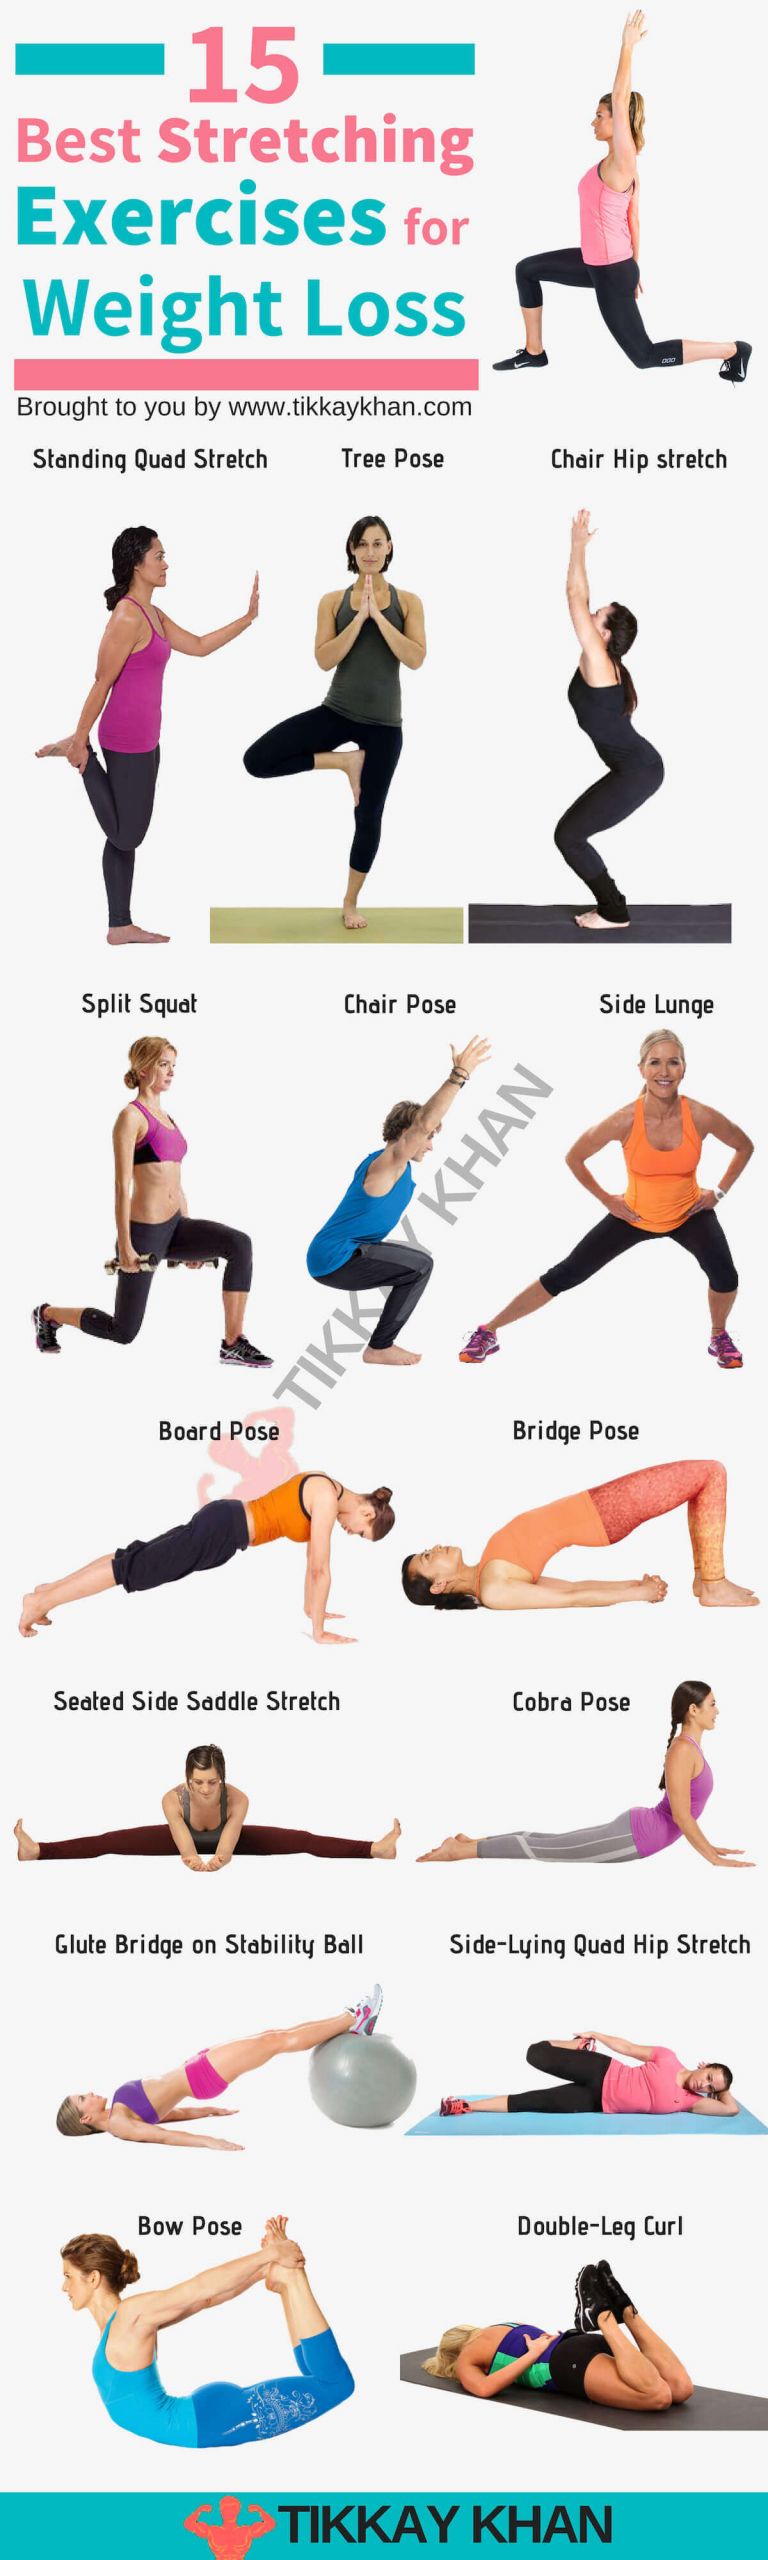 Best Weight Loss Exercises
 15 Best Stretching Exercises for Weight Loss Health